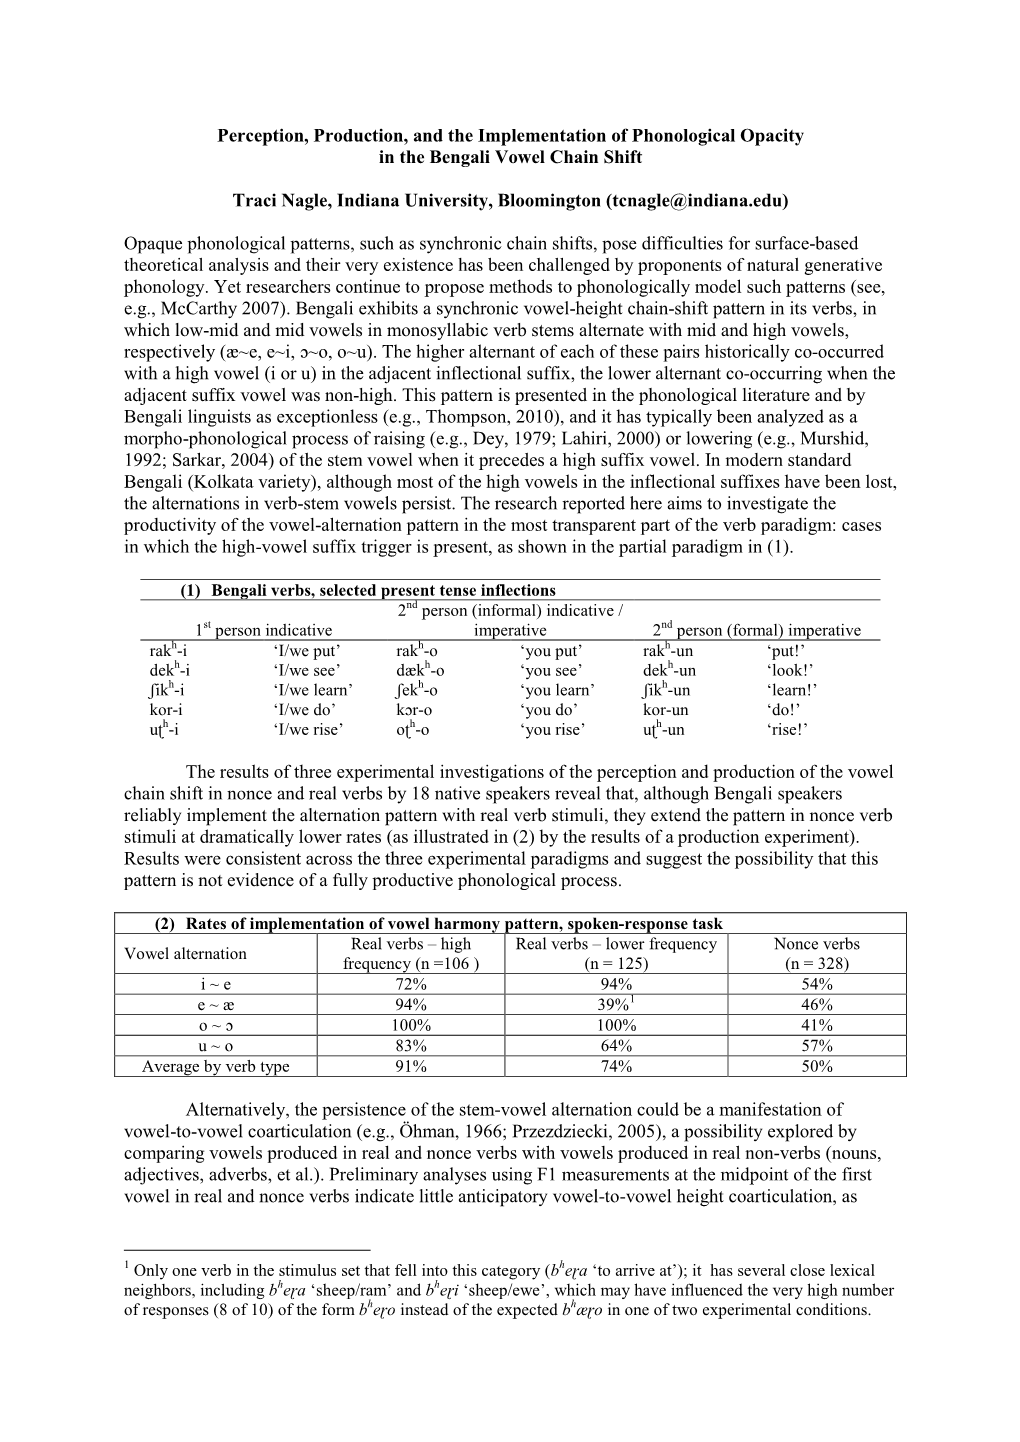 Perception, Production, and the Implementation of Phonological Opacity in the Bengali Vowel Chain Shift